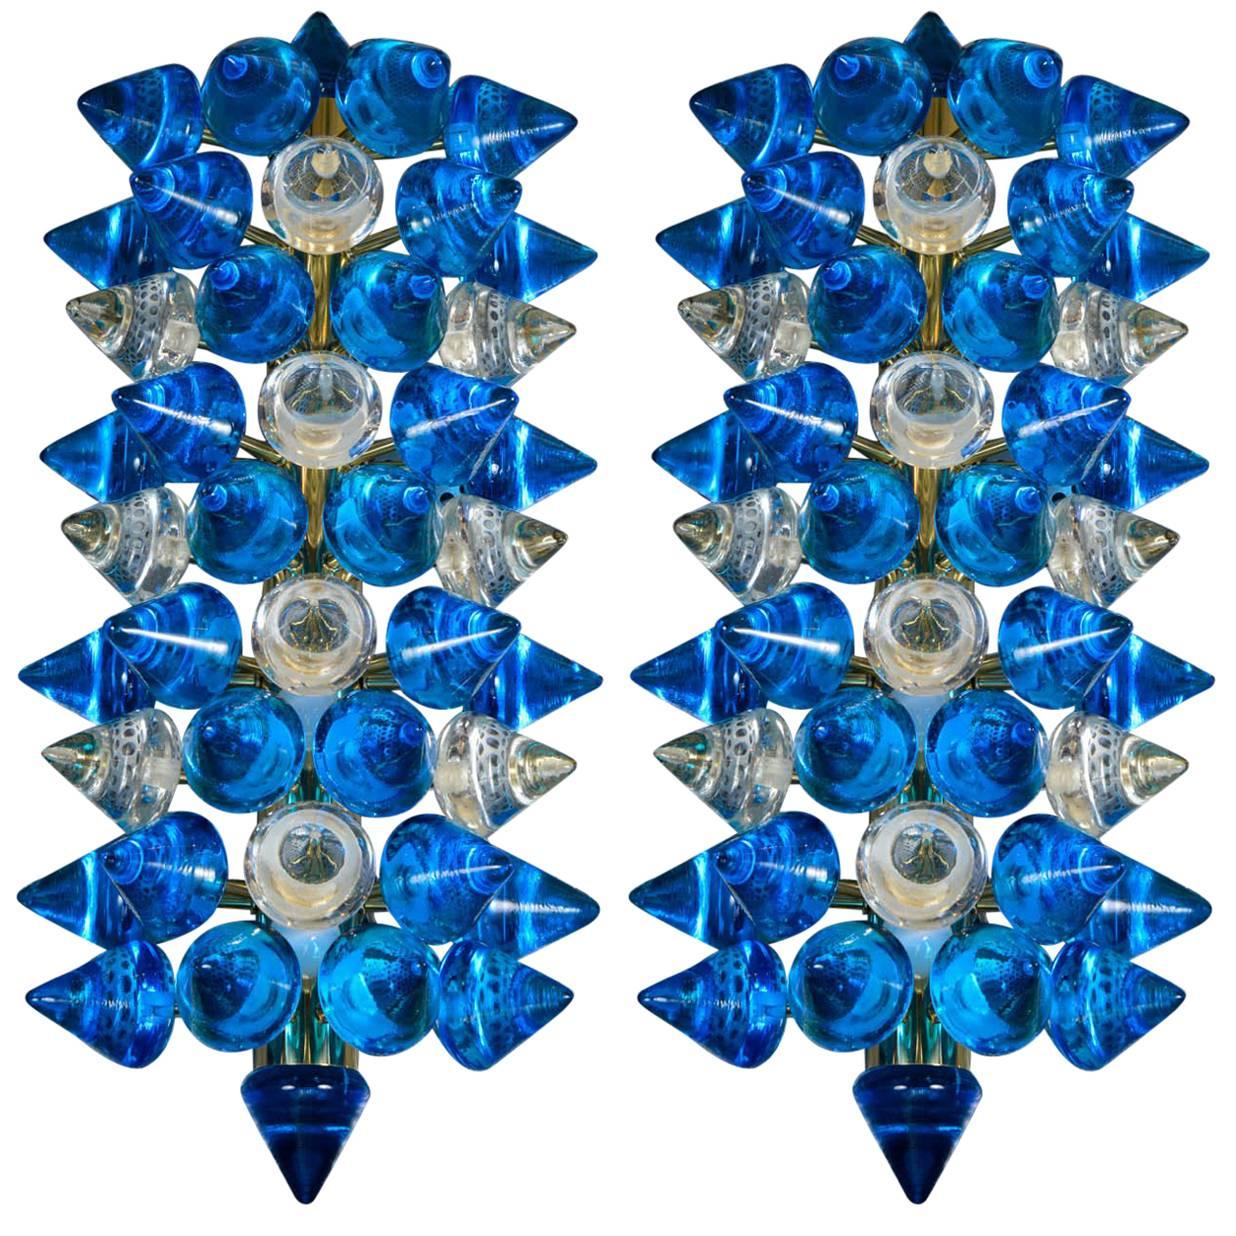 Pair of Murano Glass Sconces Designed by Regis Royant